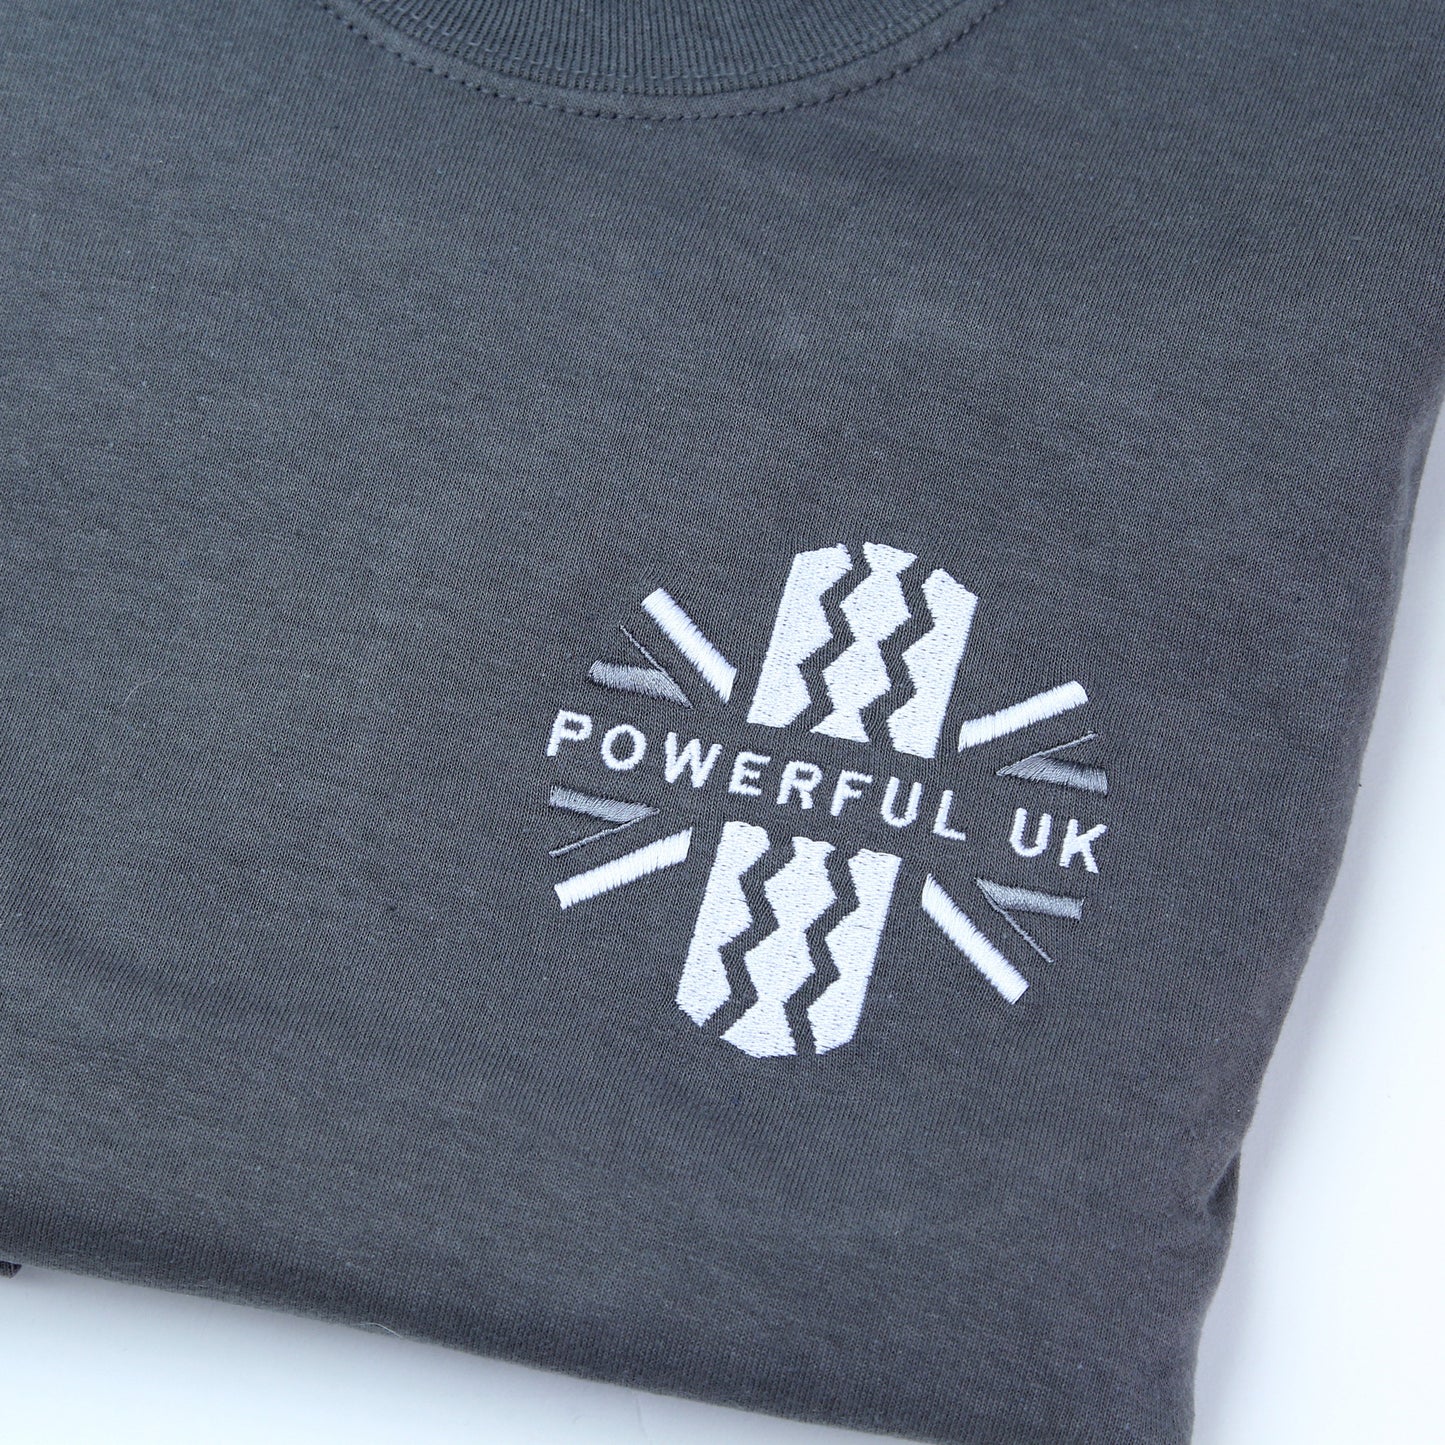 Embroidered T-Shirt Powerful UK Ltd "Merch" - Charcoal Grey - SMALL